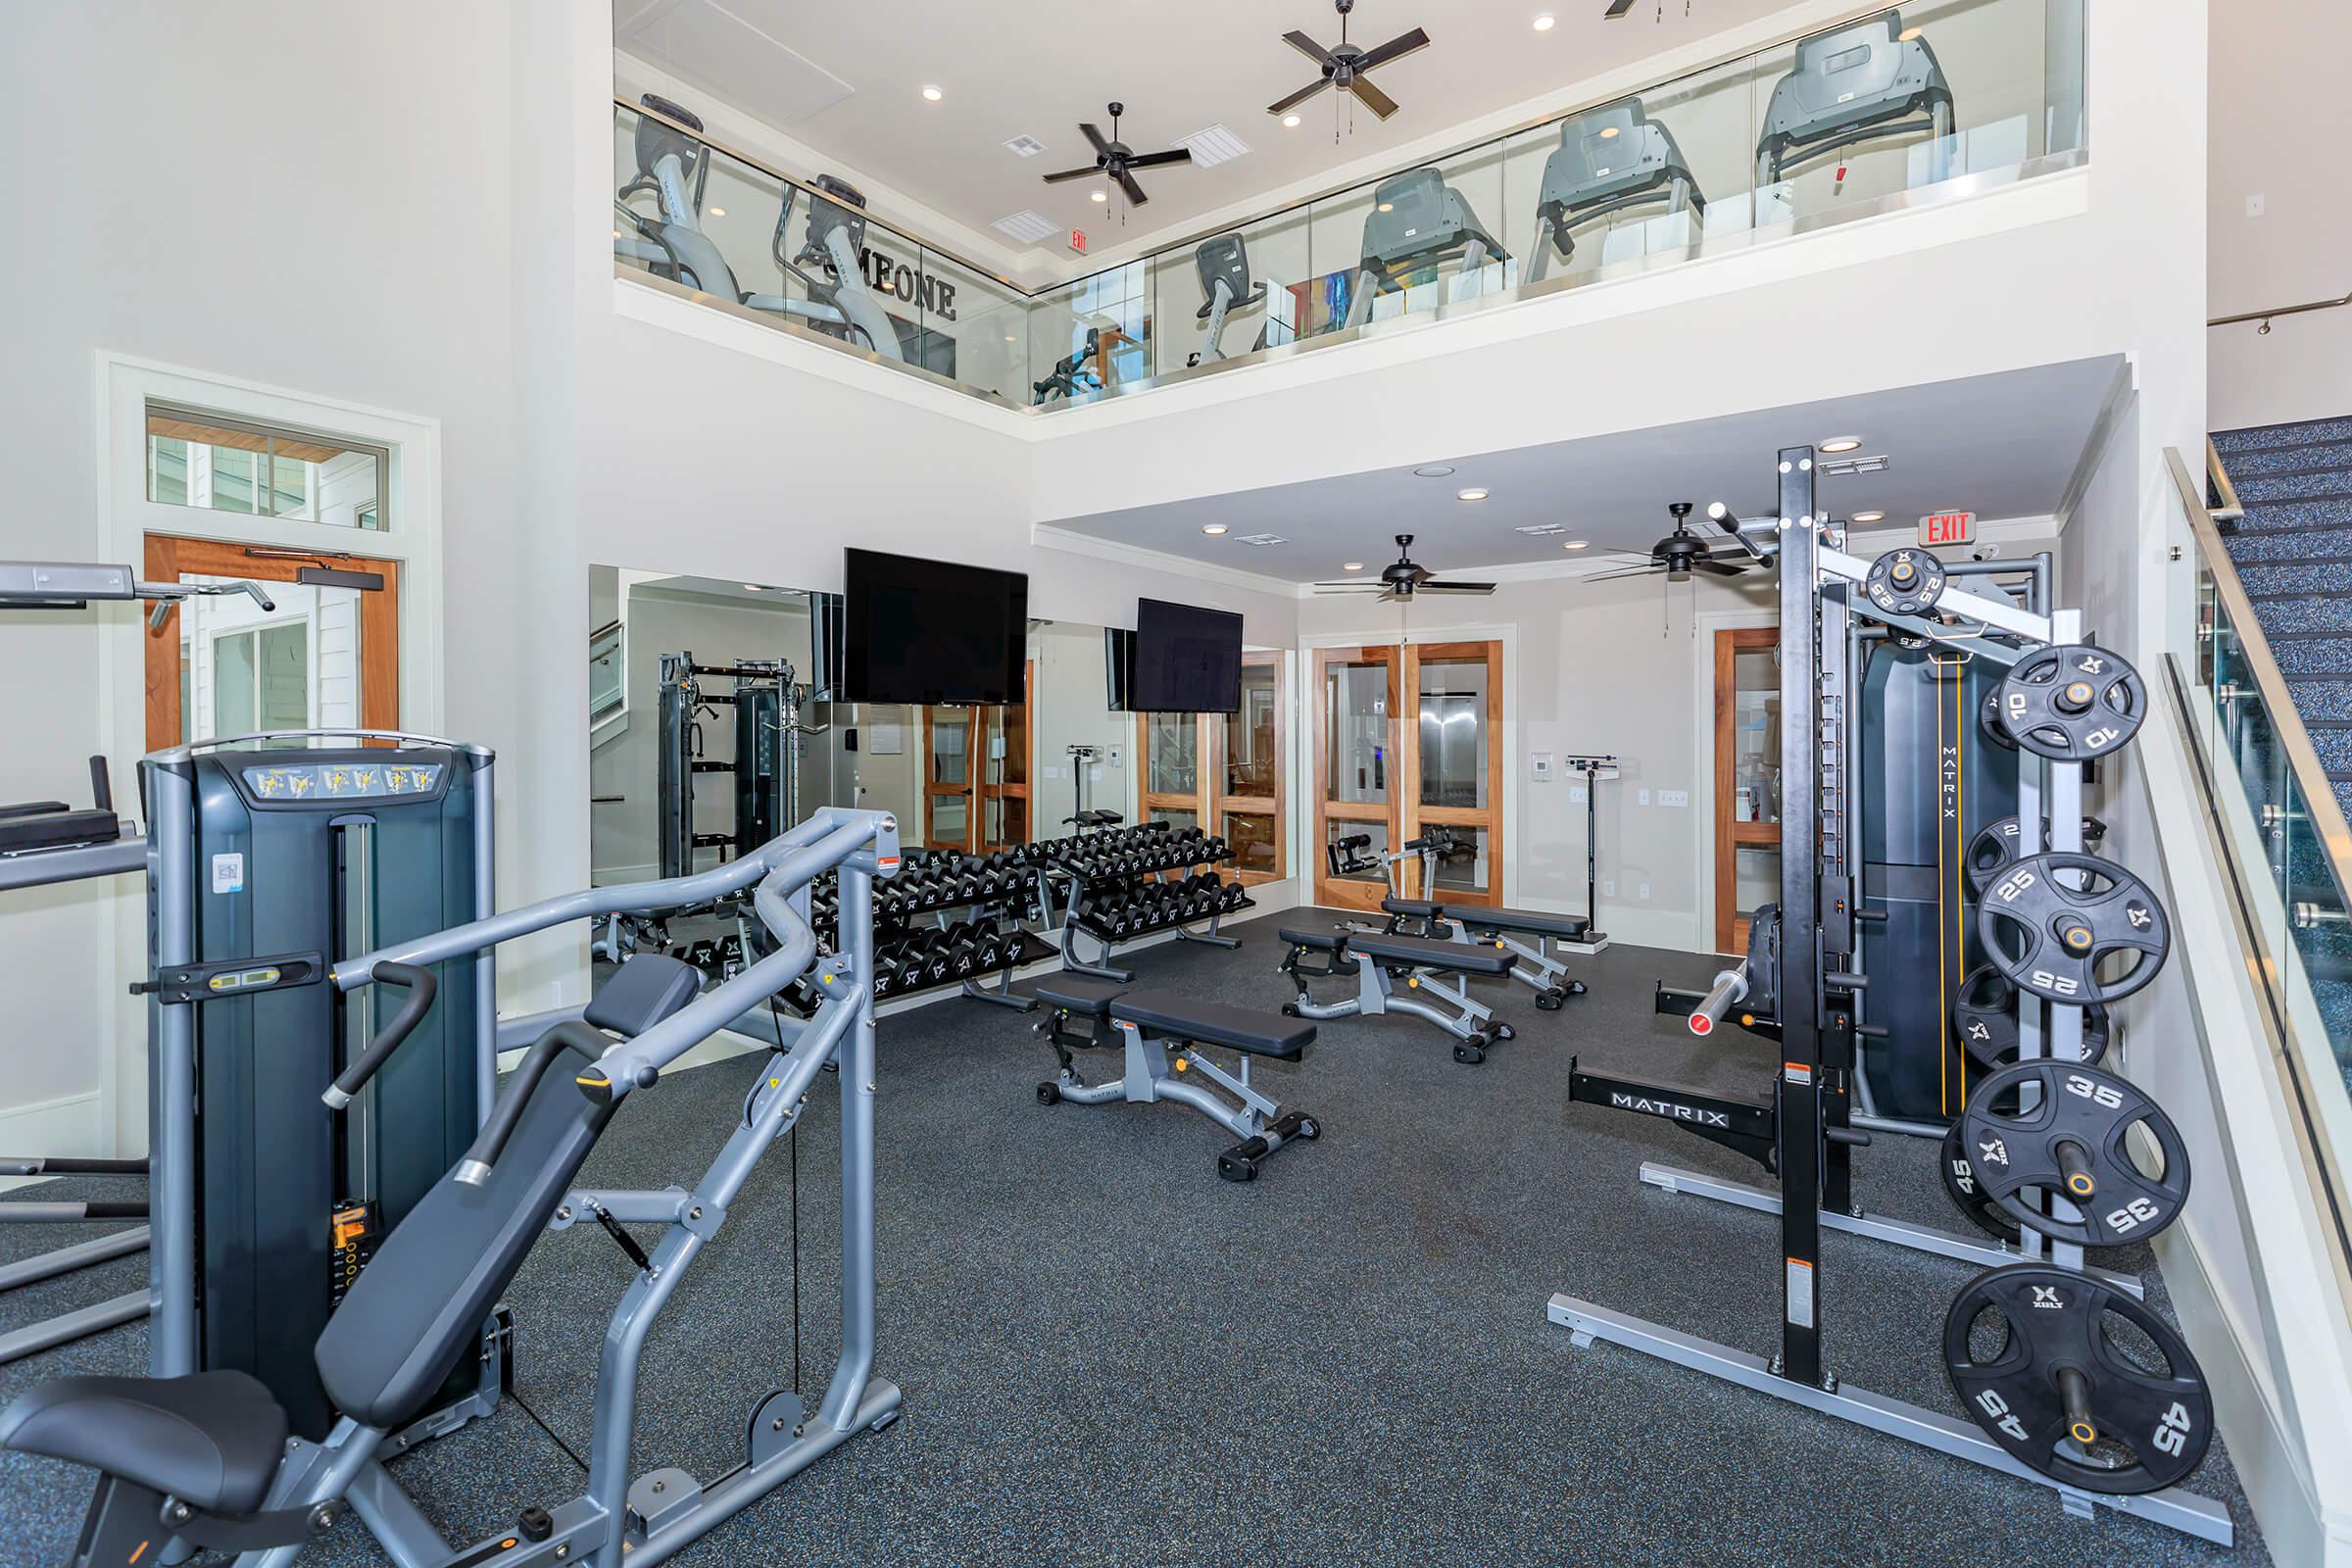 State-of-the-art fitness center here at Ariza Gosling in Spring, TX